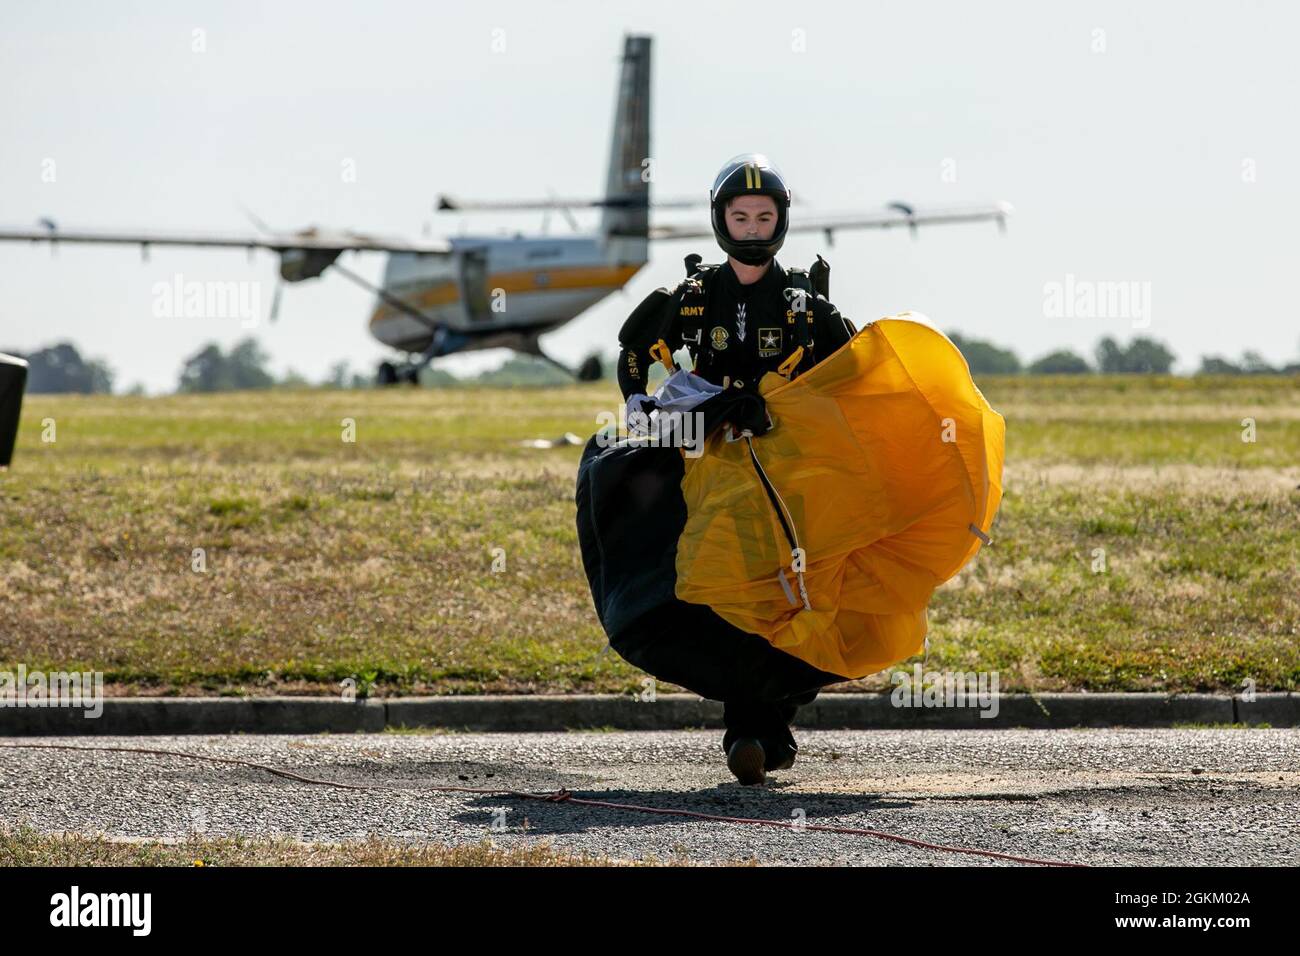 Staff Sgt. Mike Connors runs from a parachute landing at Laurinburg-Maxton Airport. Stock Photo